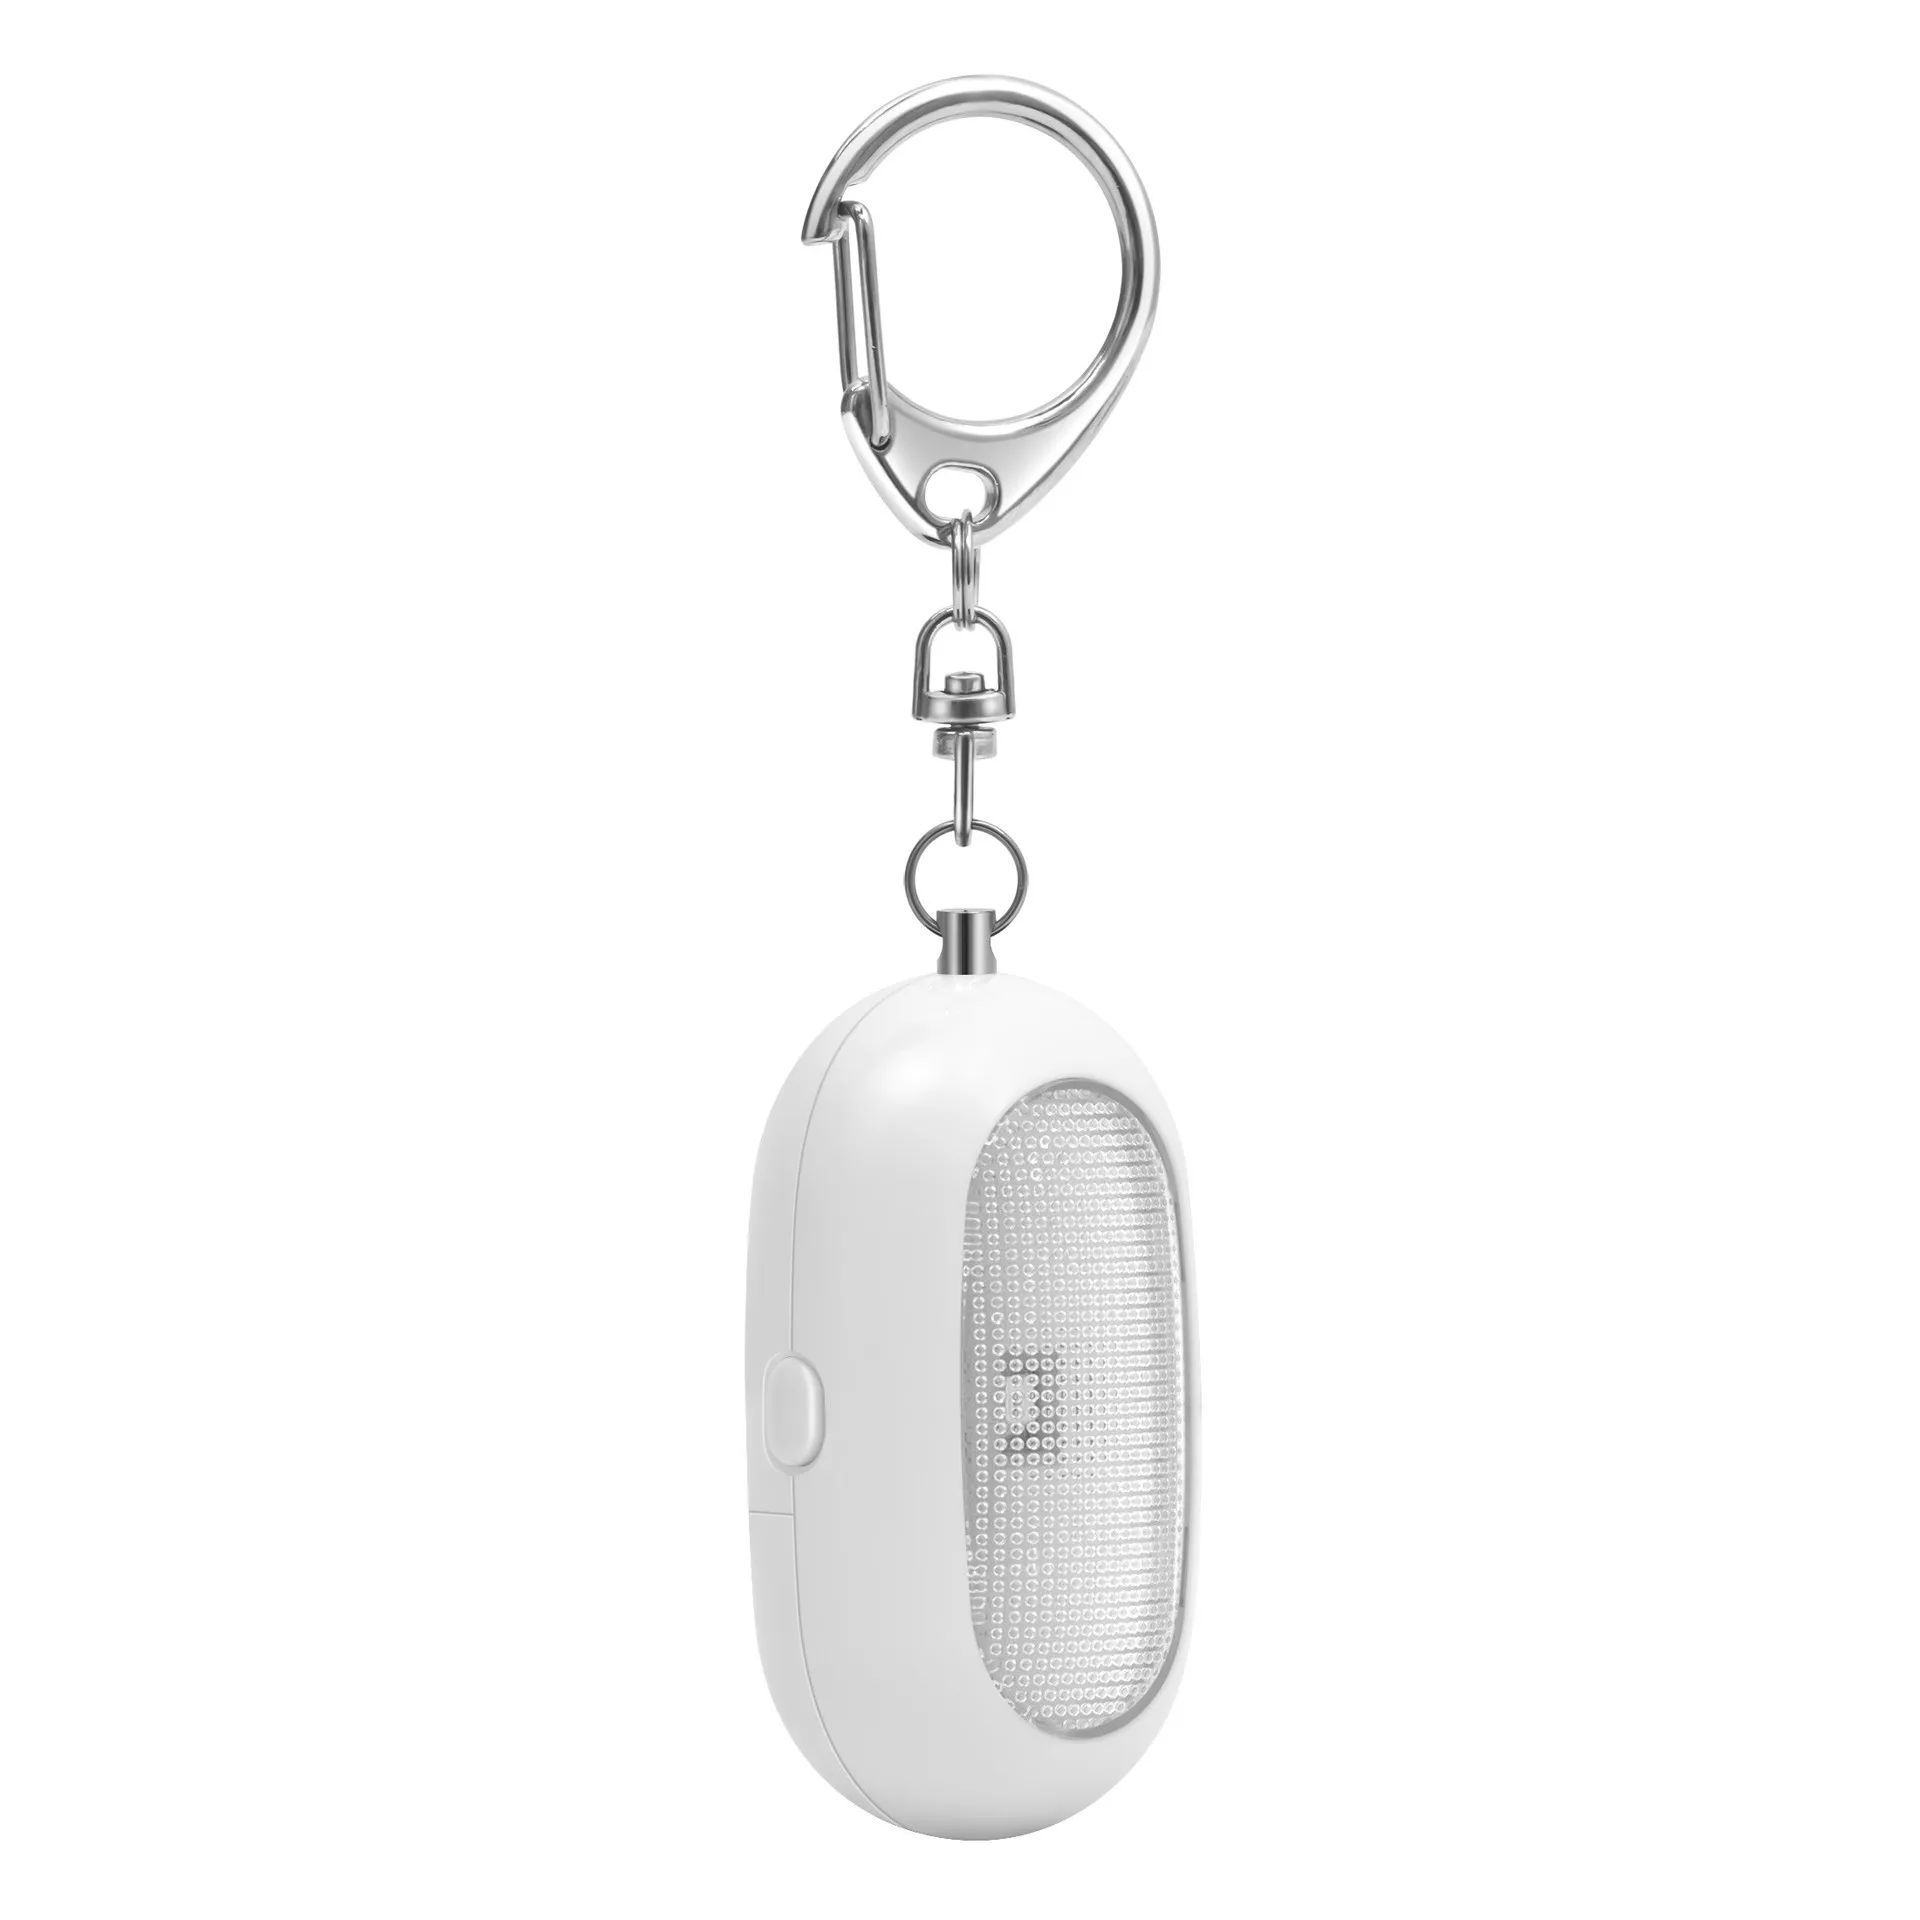 LED Self Defense Alarm 125dB Anti-wolf Girl Child Women Security Protect Personal Safety Scream Loud Emergency Alarm Keychain images - 6